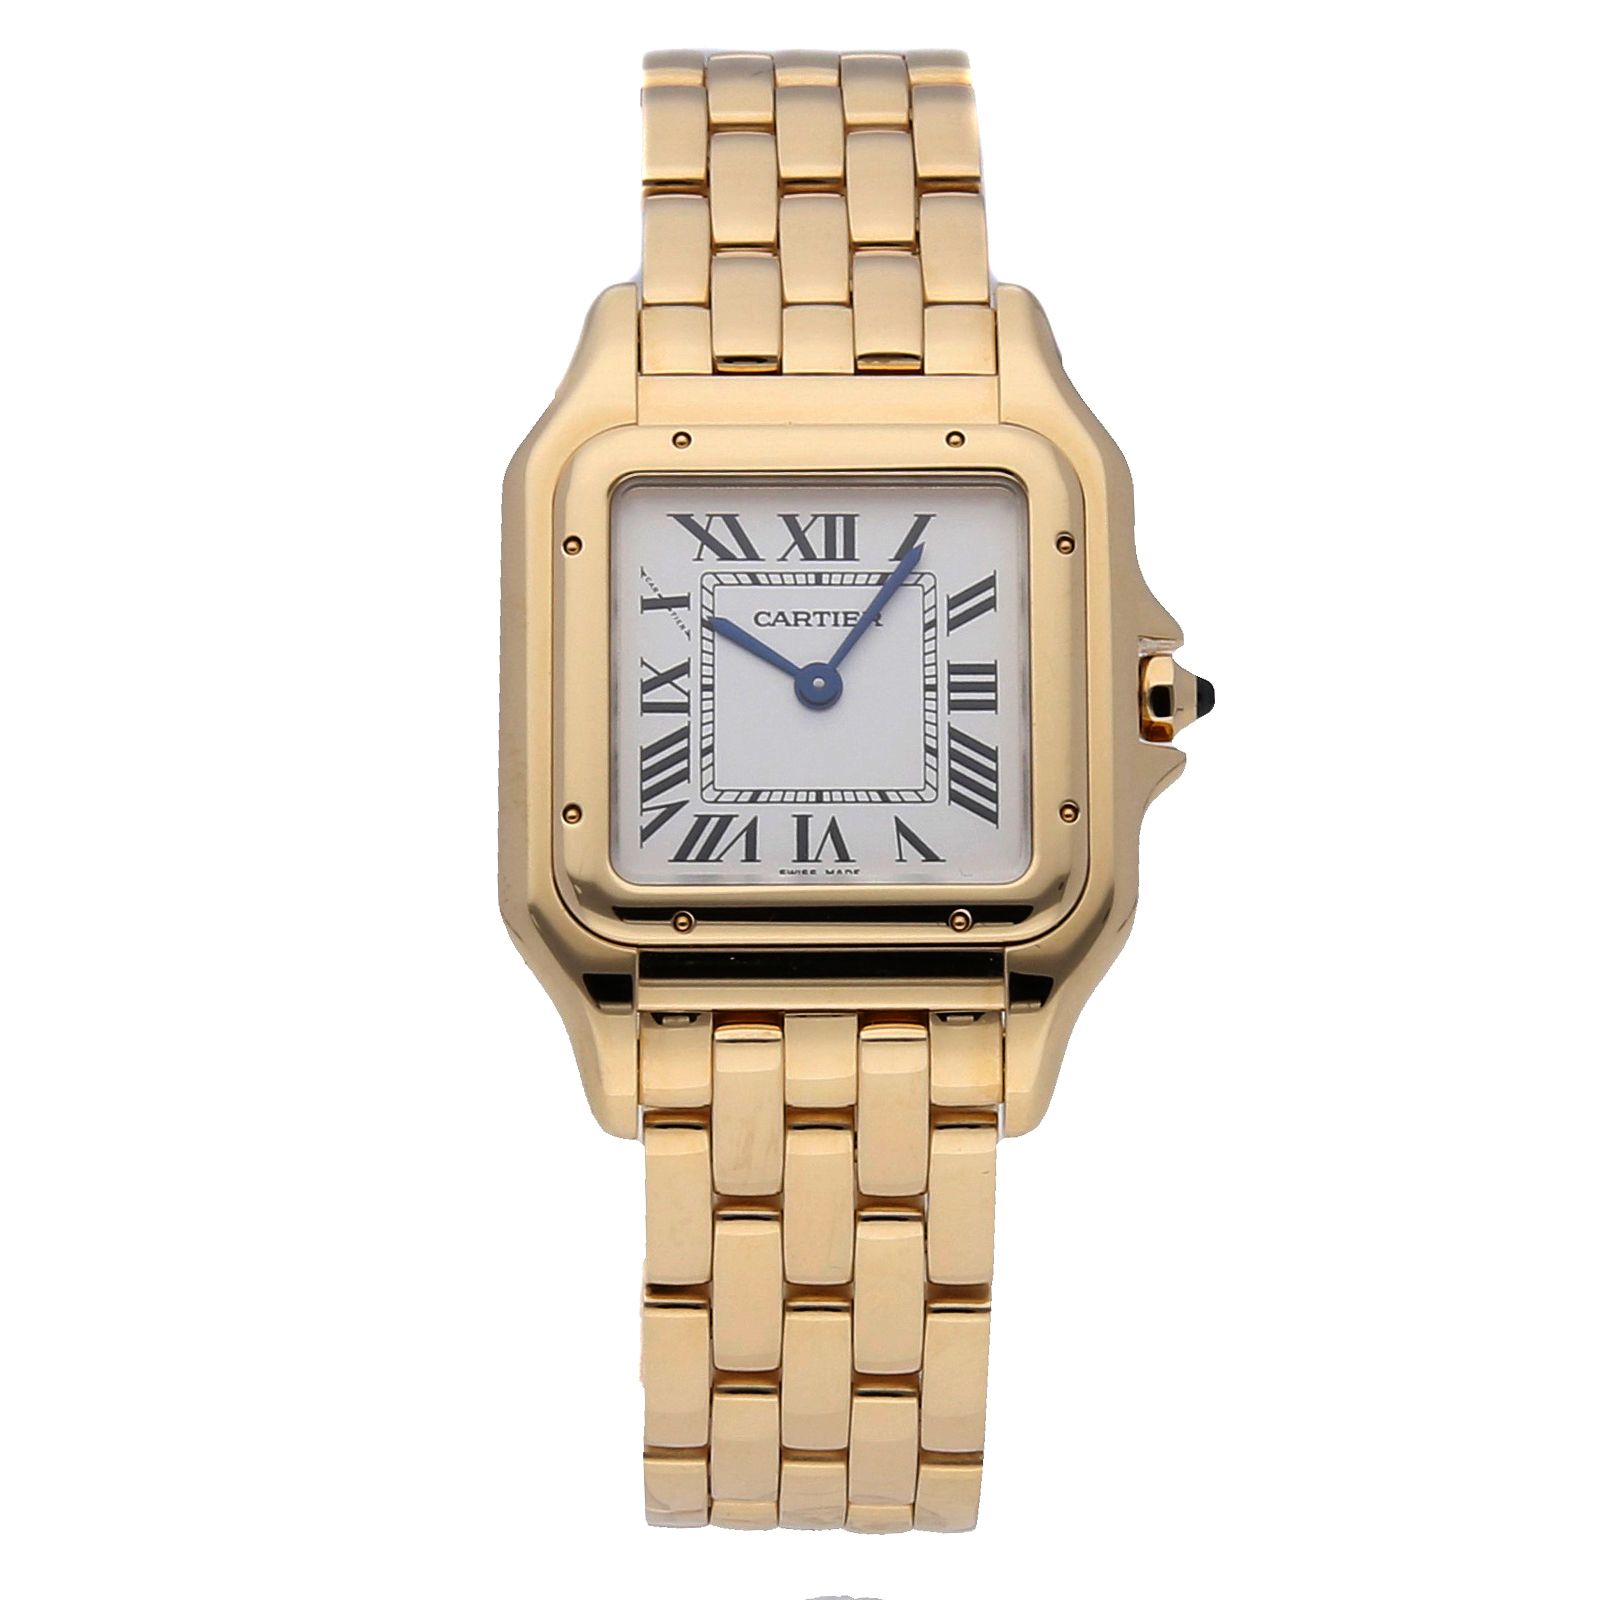 cartier watch used